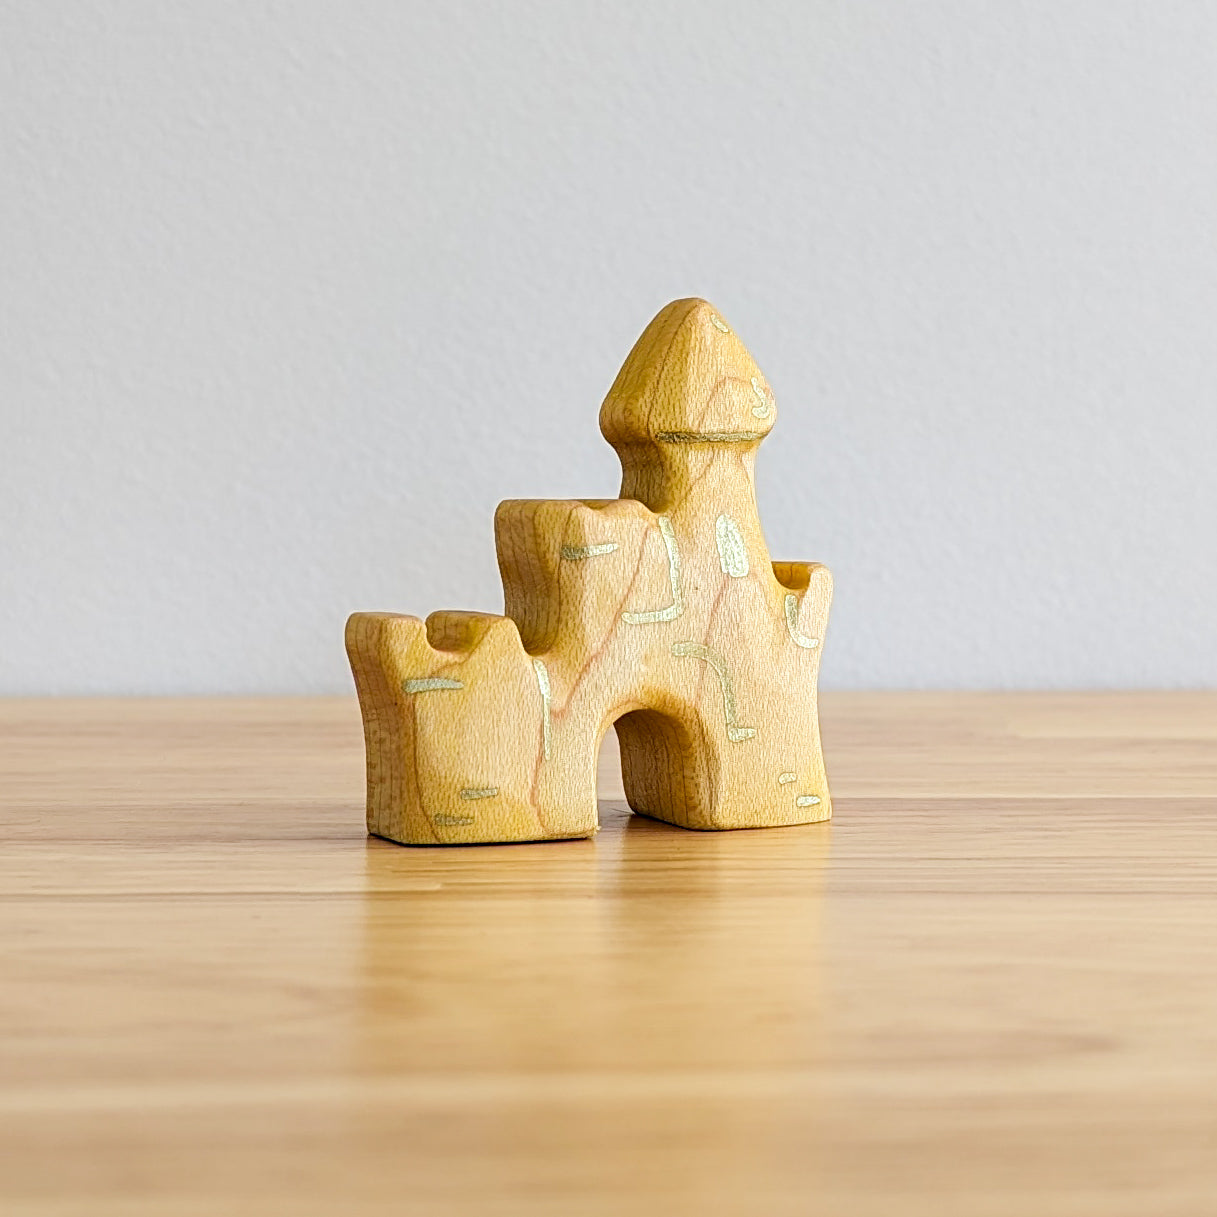 Sandcastle Wooden Toy